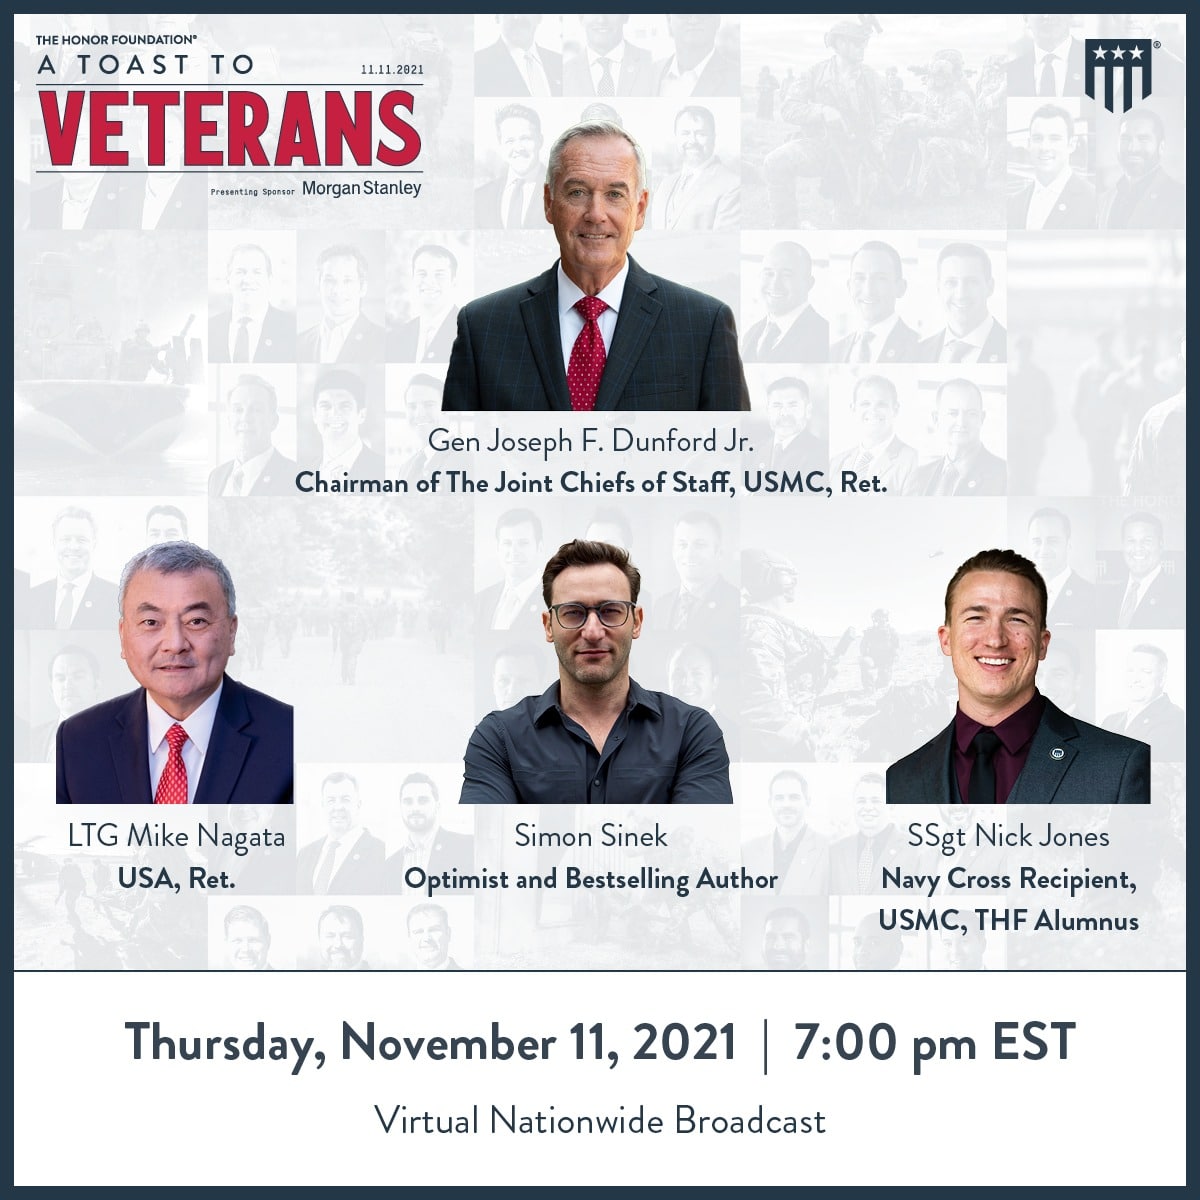 2021 “A Toast to Veterans” Virtual Event